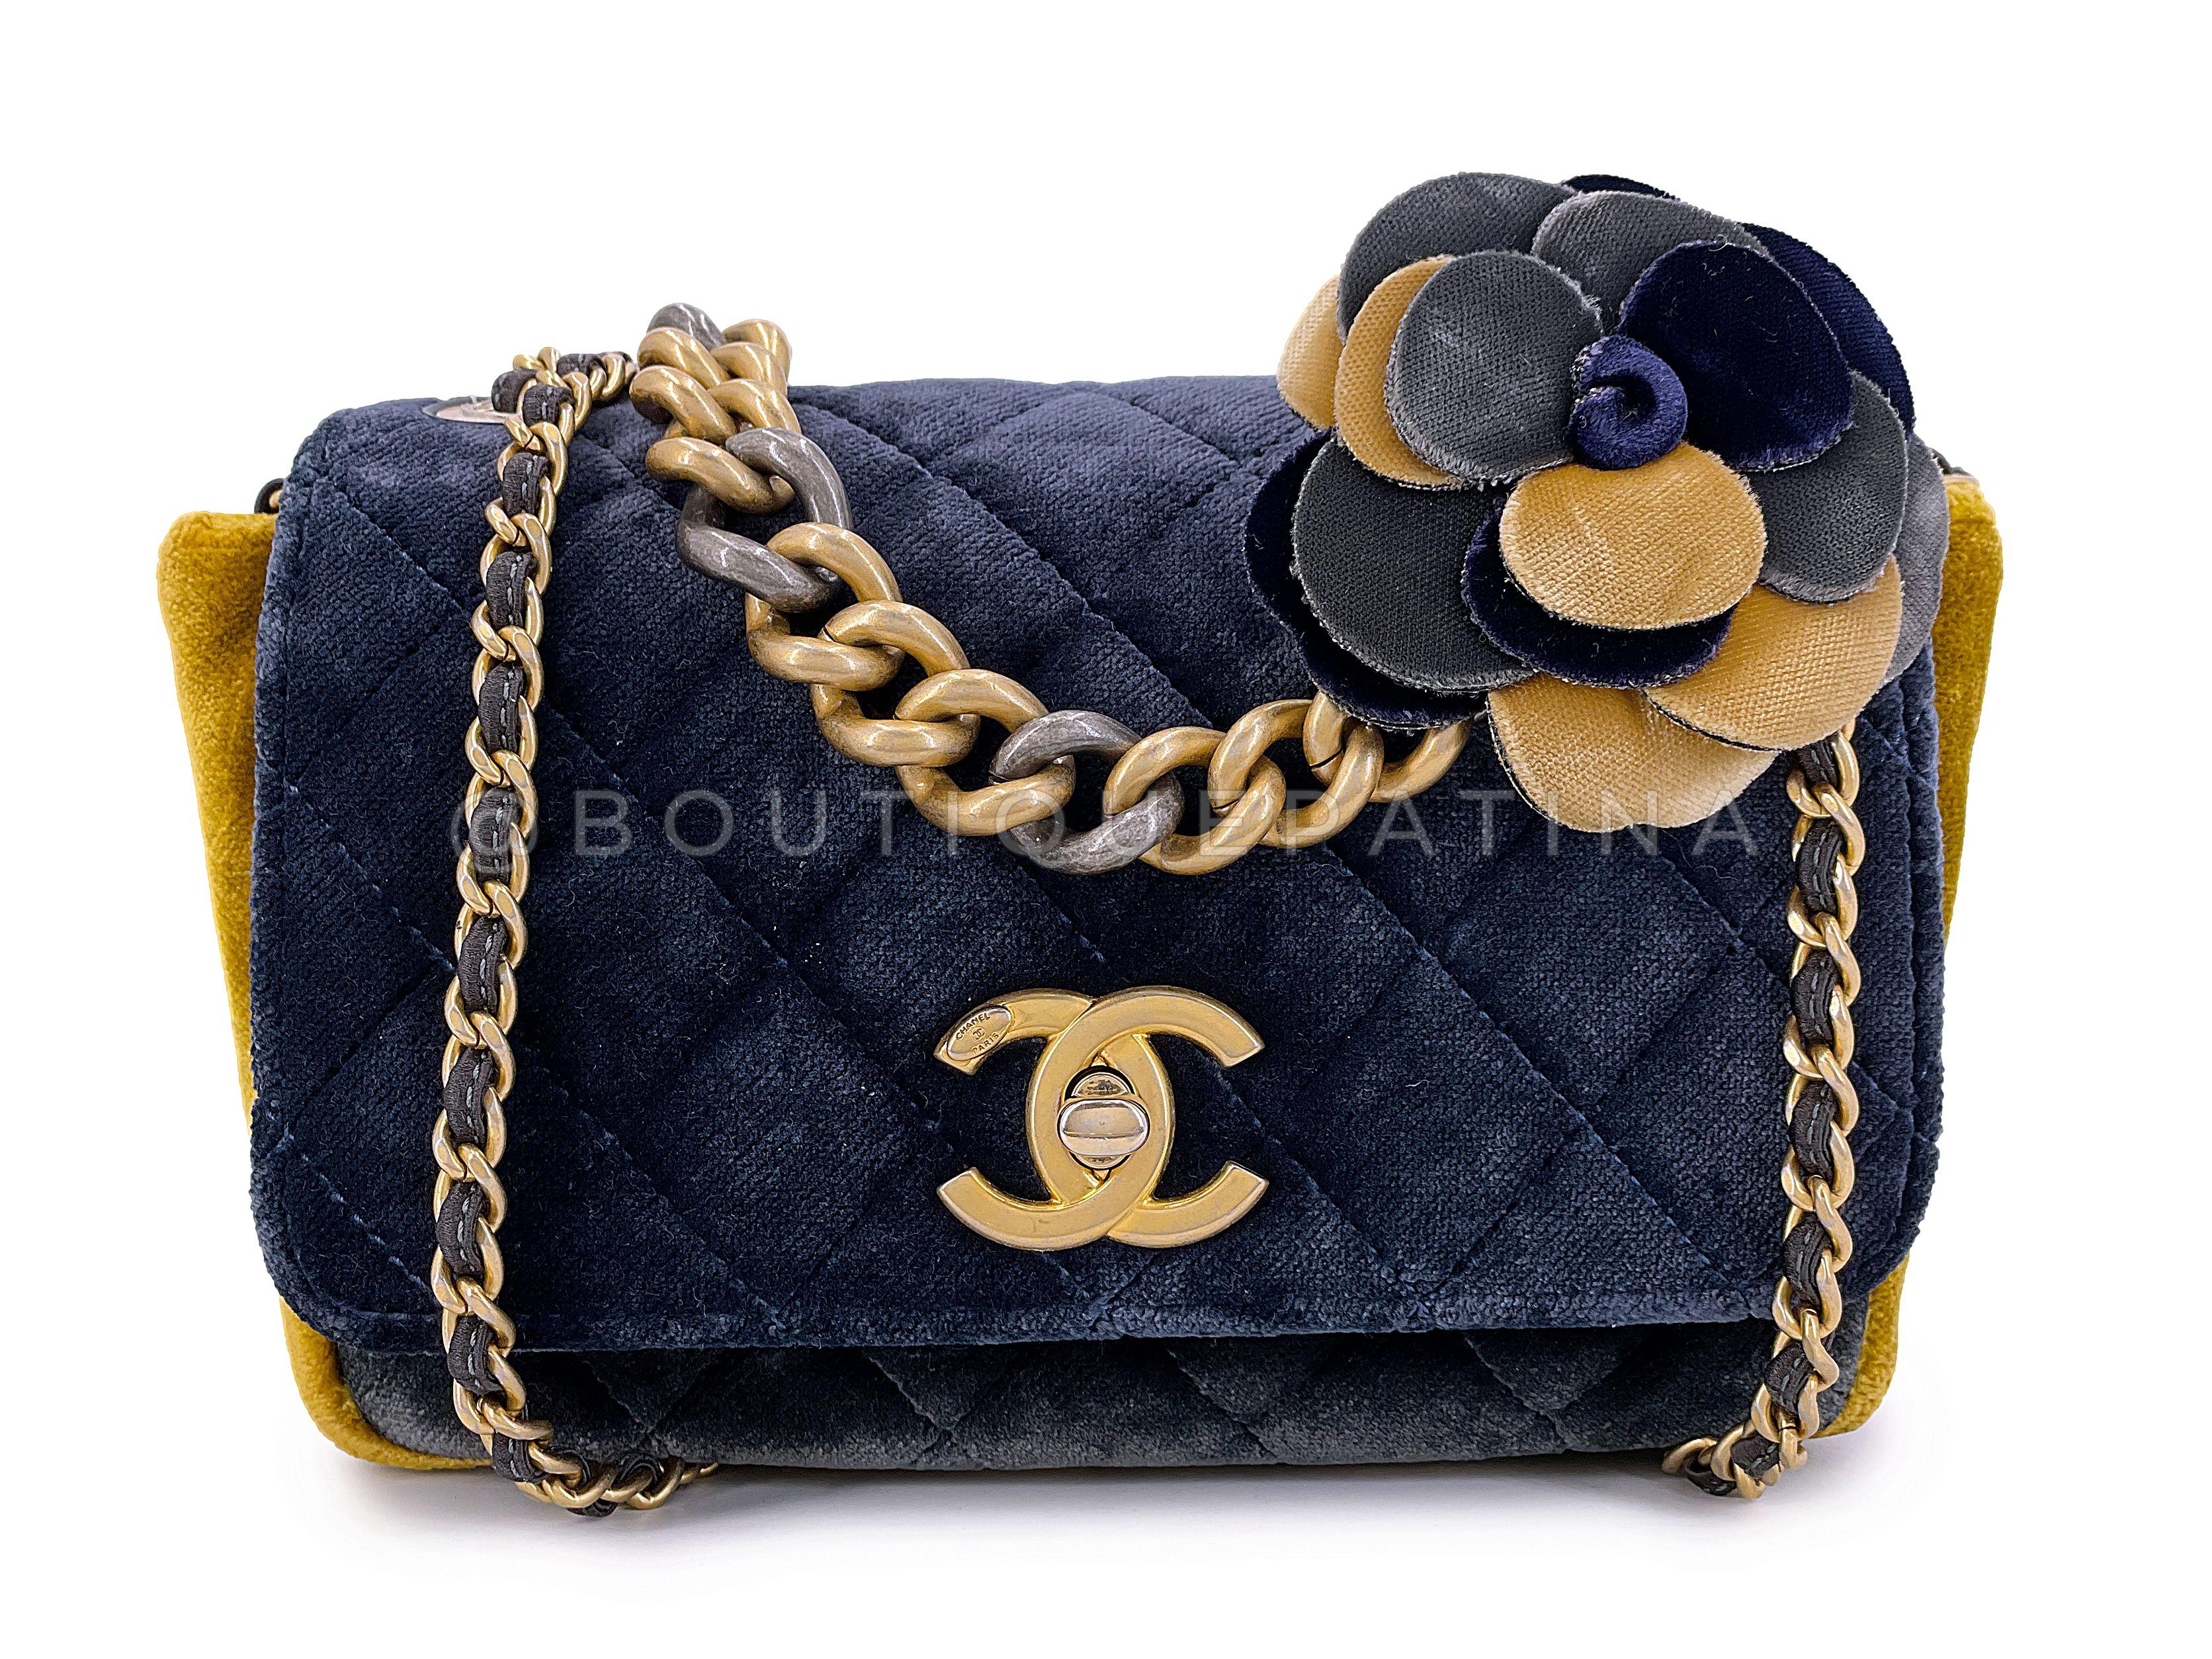 Store item: 67942
This Chanel 2018 Paris-Cosmopolite Métiers d'Art Velvet Mini Flap Bag is a limited edition piece in a rare velvet with chunky two-tone hardware and separate velvet card case with pearl button. 

For 20 years, Boutique Patina has